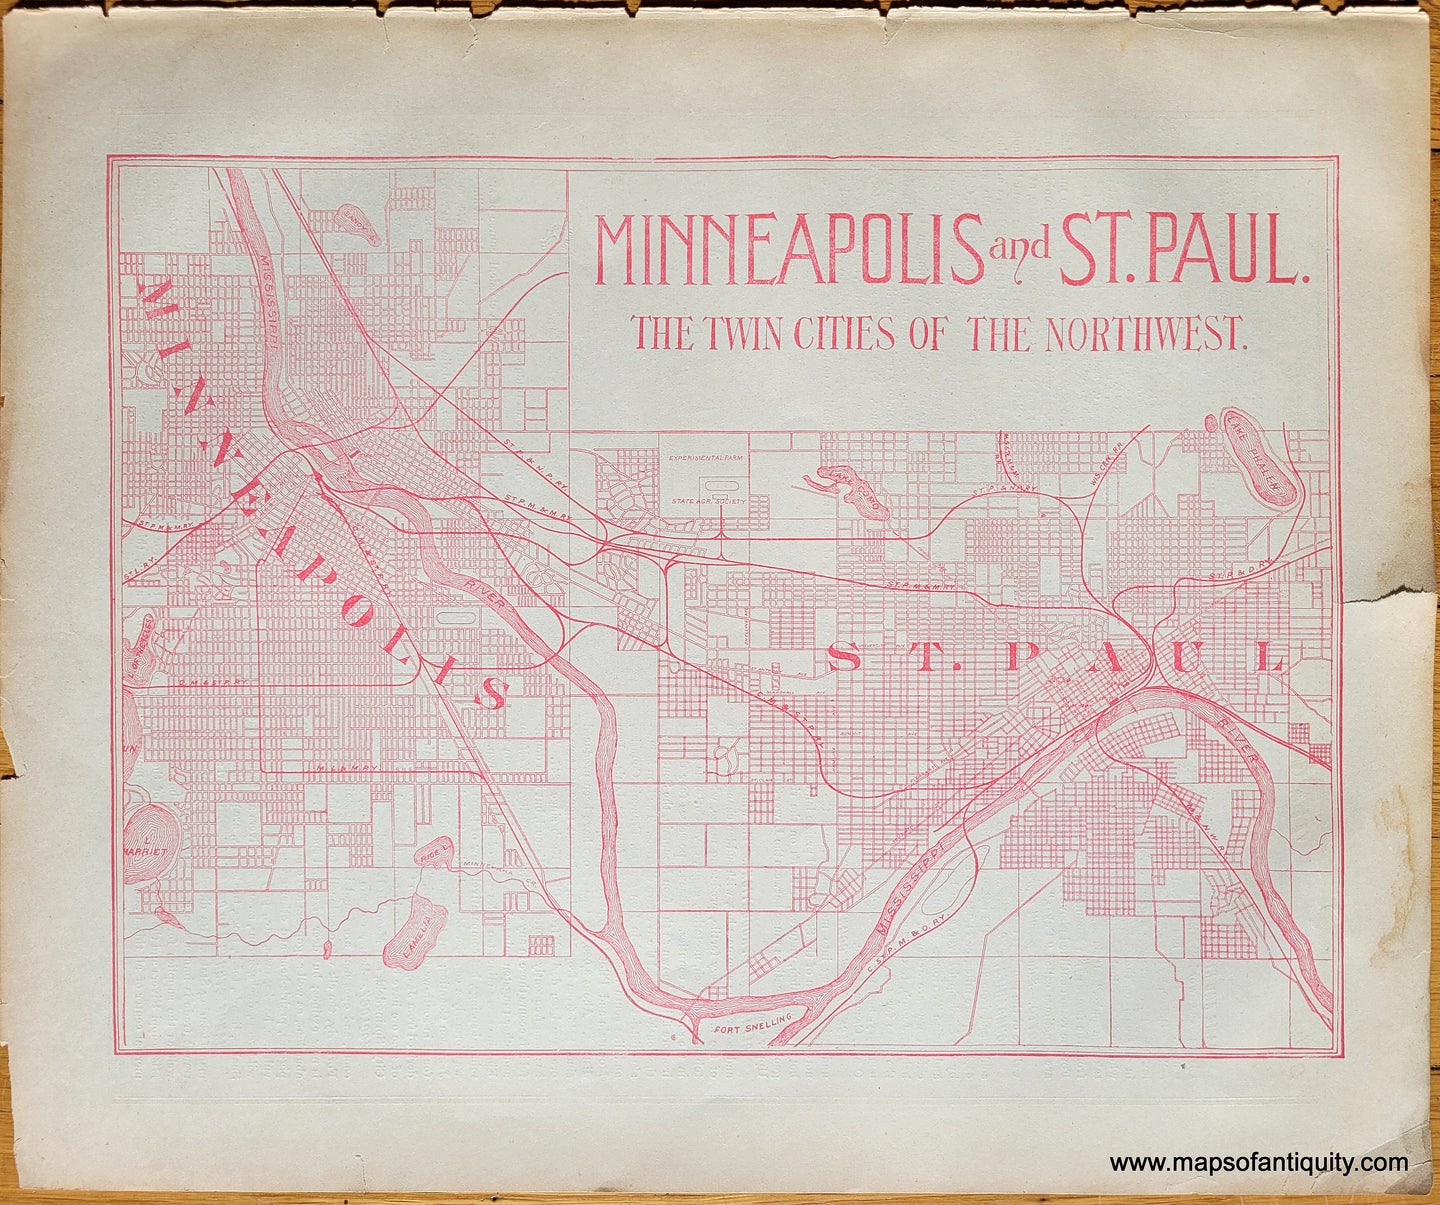 Antique-Map-City-Minneapolis-and-St.-Paul-Minnesota-The-Twin-Cities-of-the-Northwest-Hunt-&-Eaton-1892-1890s-Late-19th-Century-Maps-of-Antiquity